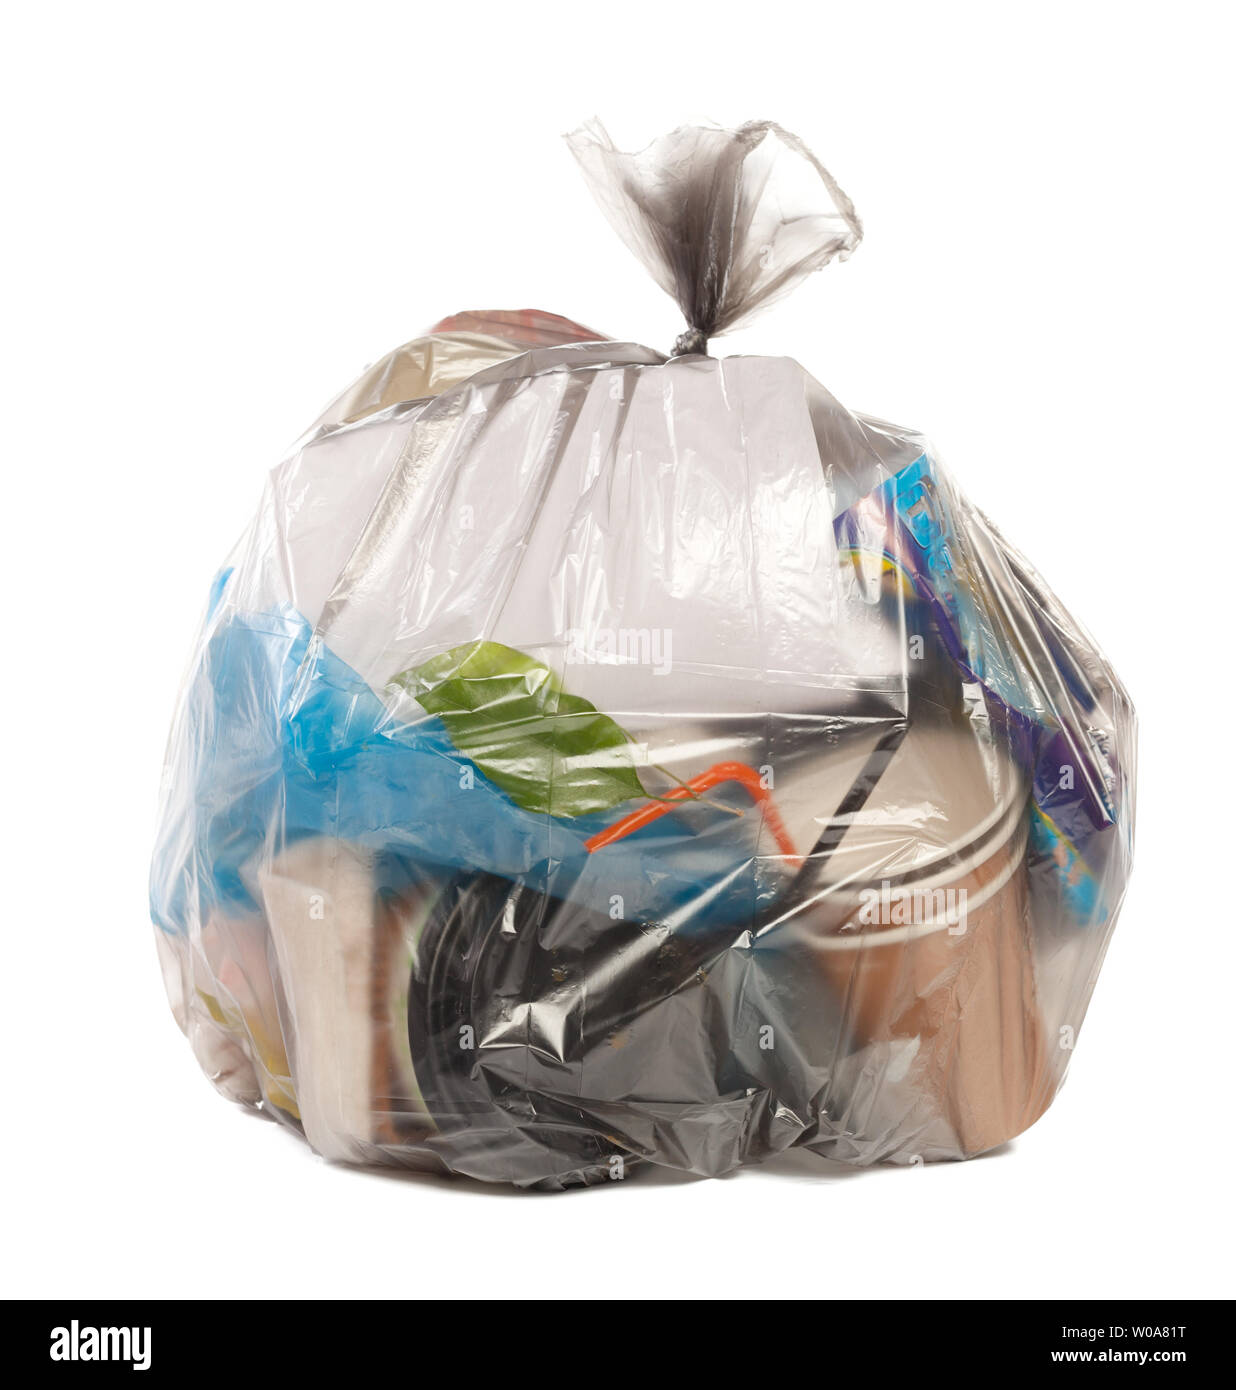 https://c8.alamy.com/comp/W0A81T/plastic-bag-full-of-rubbish-on-isolated-white-background-W0A81T.jpg